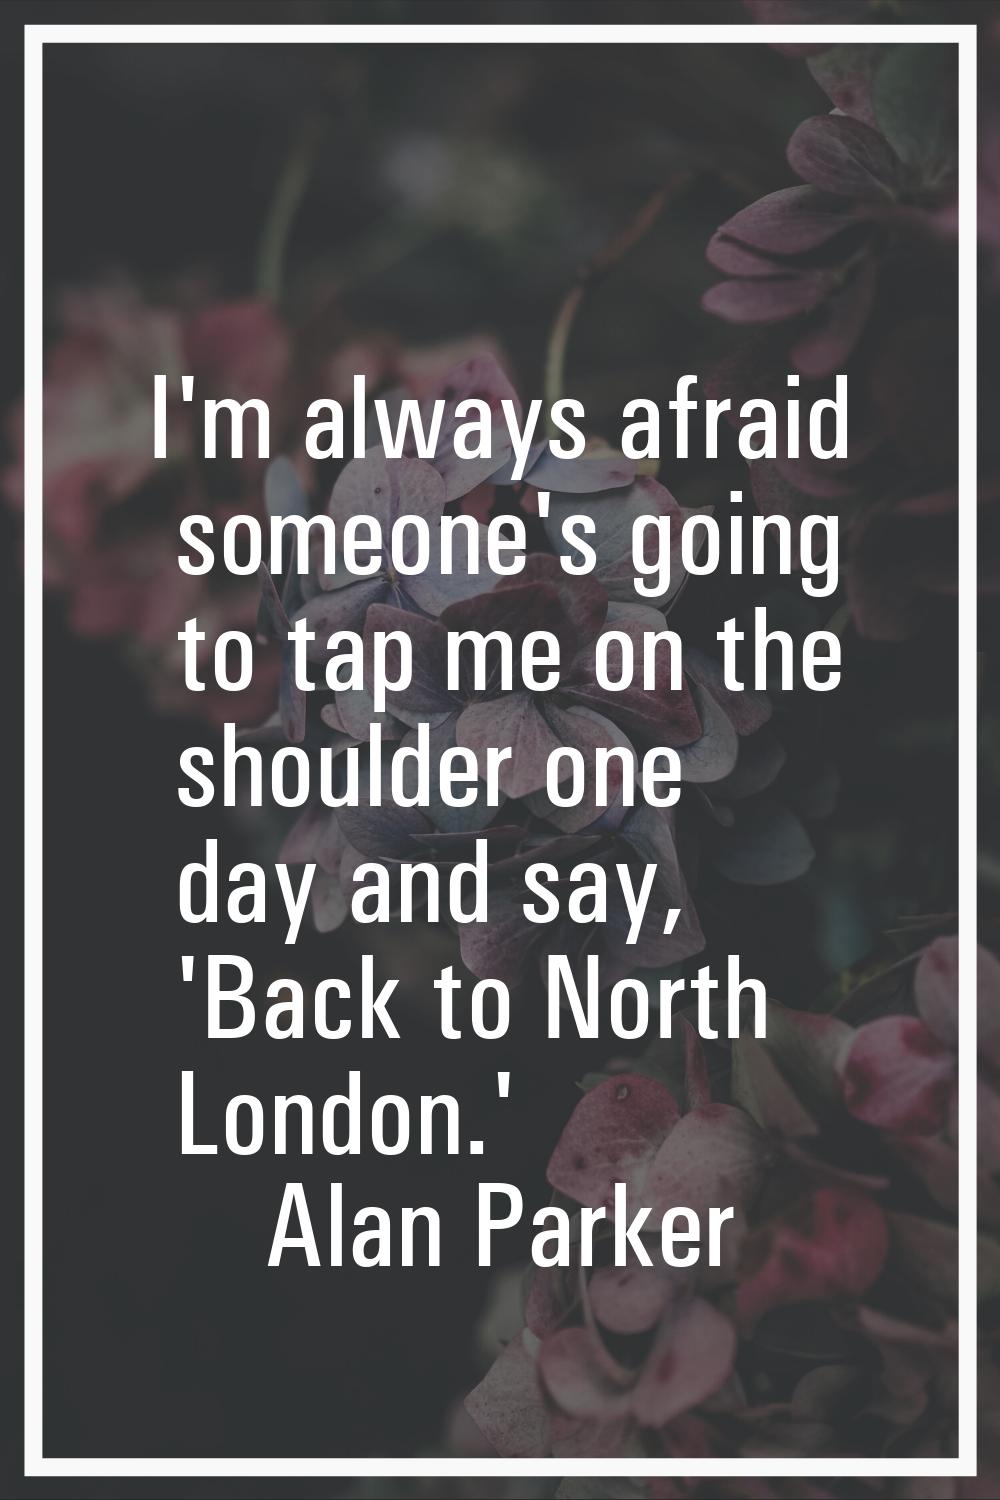 I'm always afraid someone's going to tap me on the shoulder one day and say, 'Back to North London.